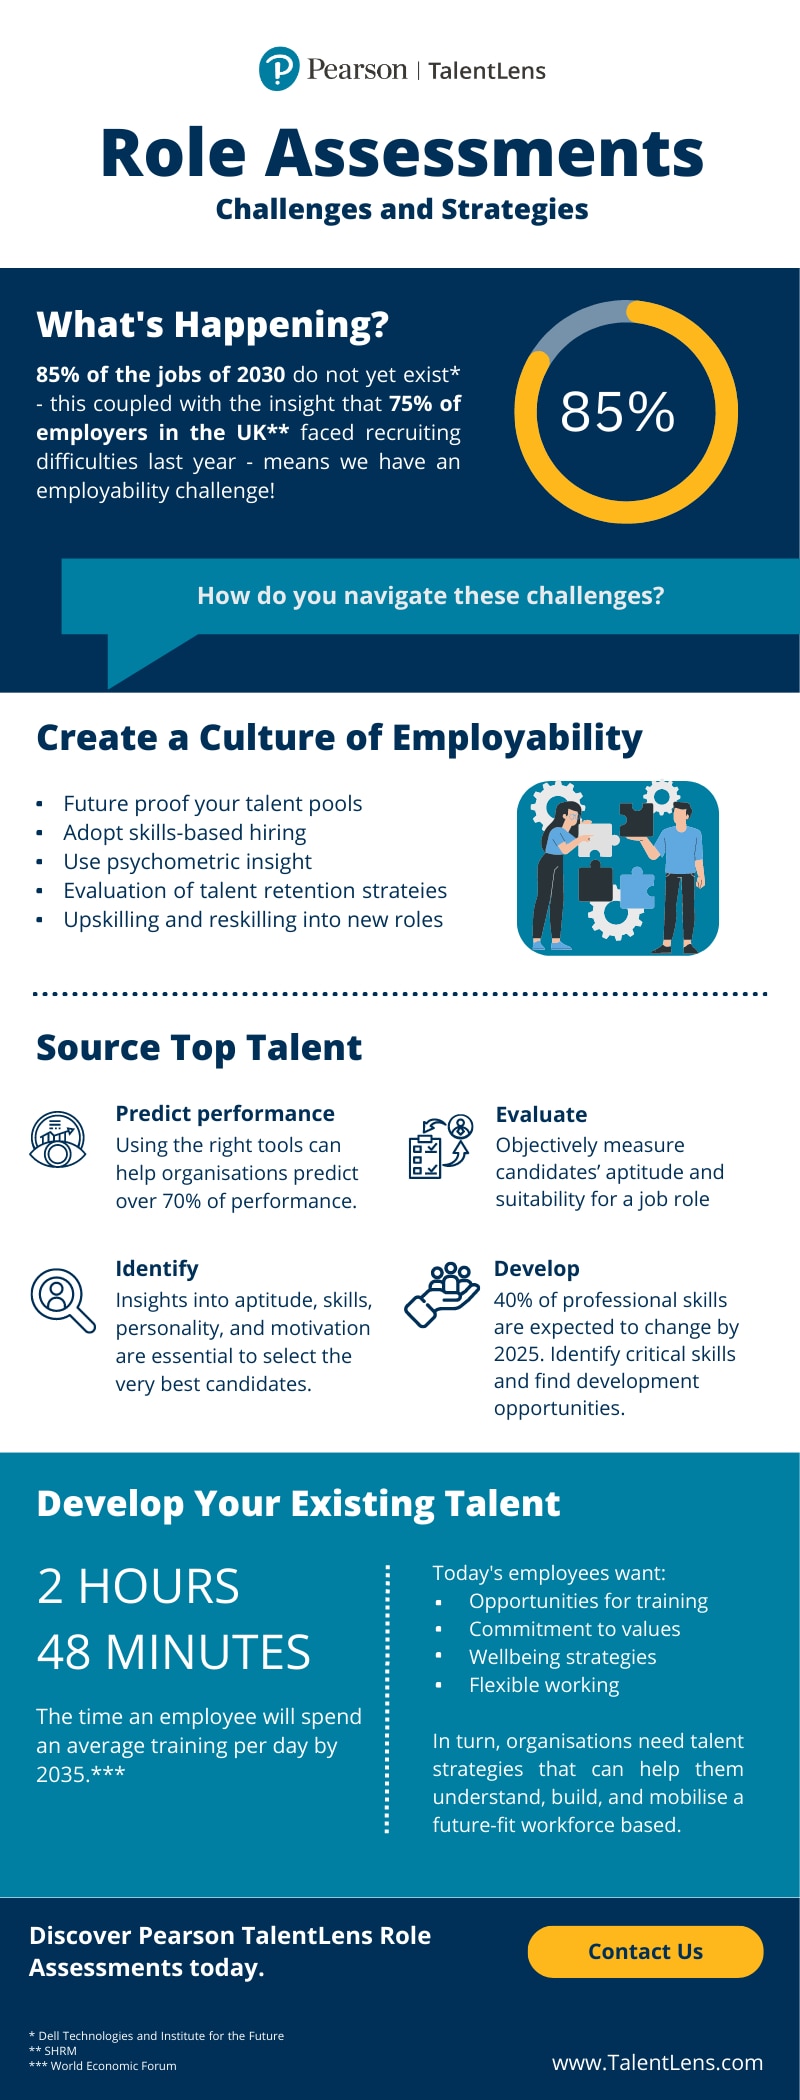 Tackle the employability challenge and future-proof your workforce with Pearson TalentLens.